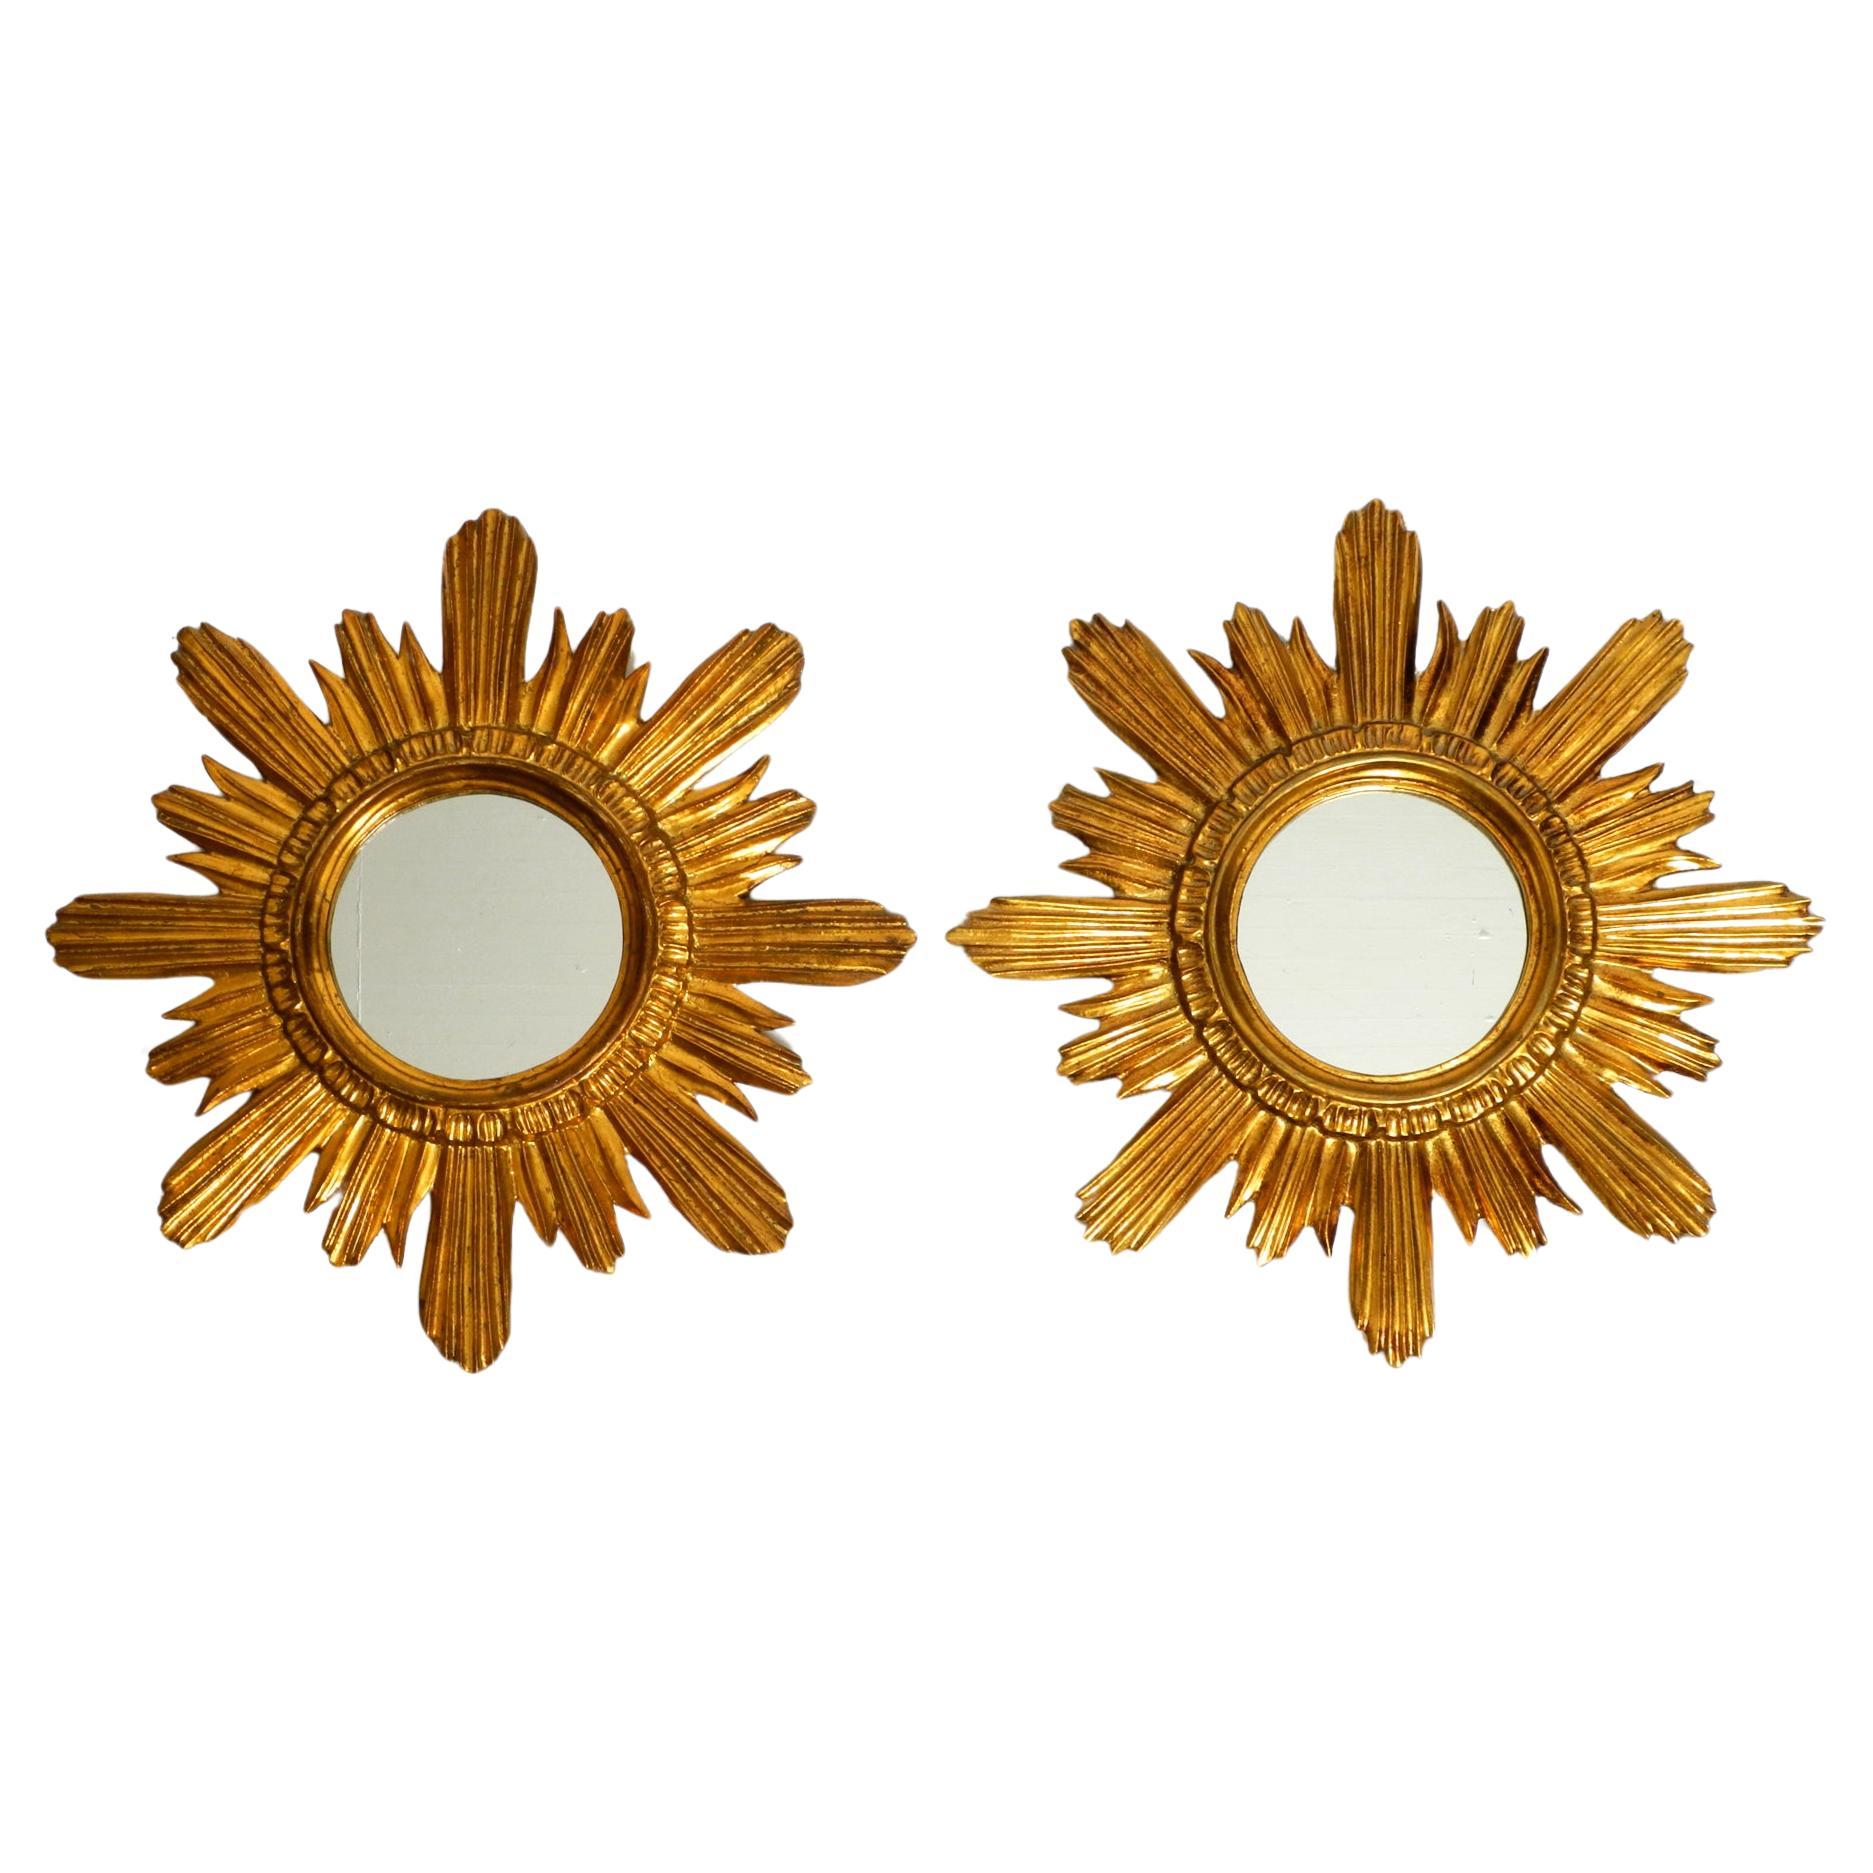 Pair of gold-plated mid-century sunburst wall mirrors made of wood and resin